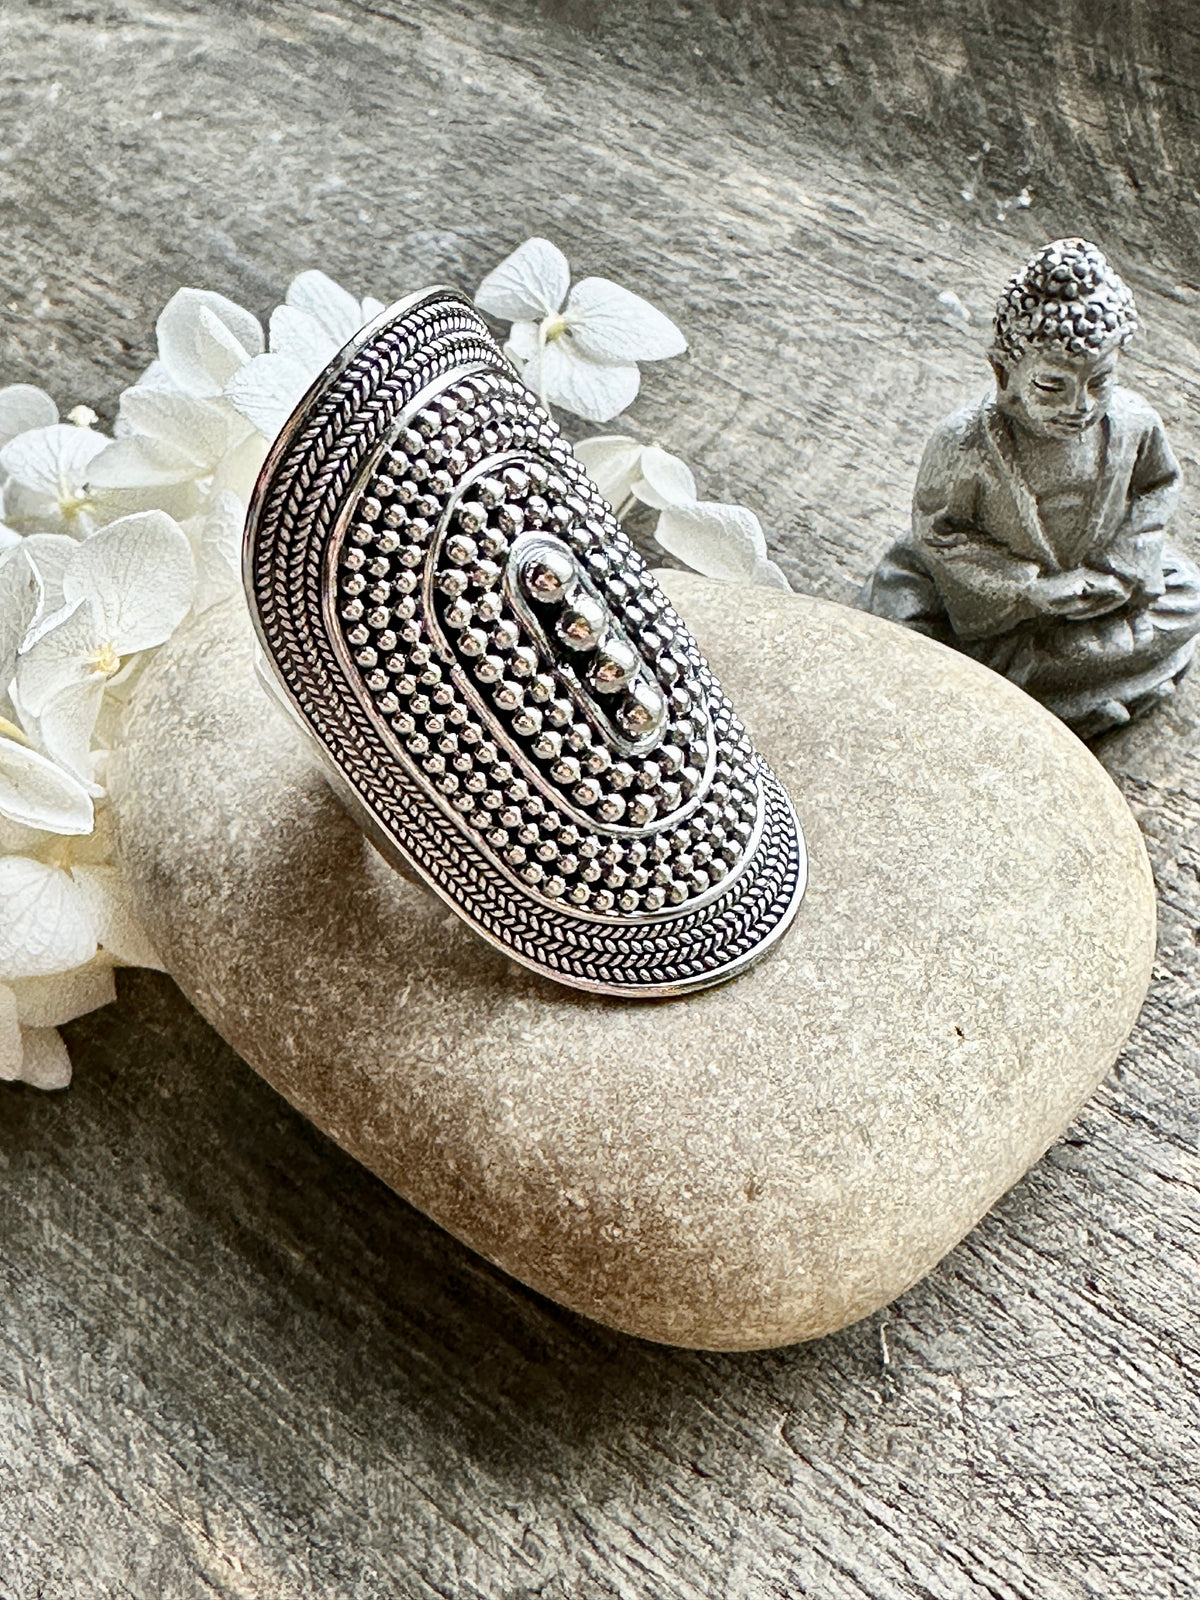 Exquisite Beaded Wrap Ring: Handcrafted 925 Solid Silver Statement Piece for Unparalleled Style and Elegance - Perfect for Any Occasion!